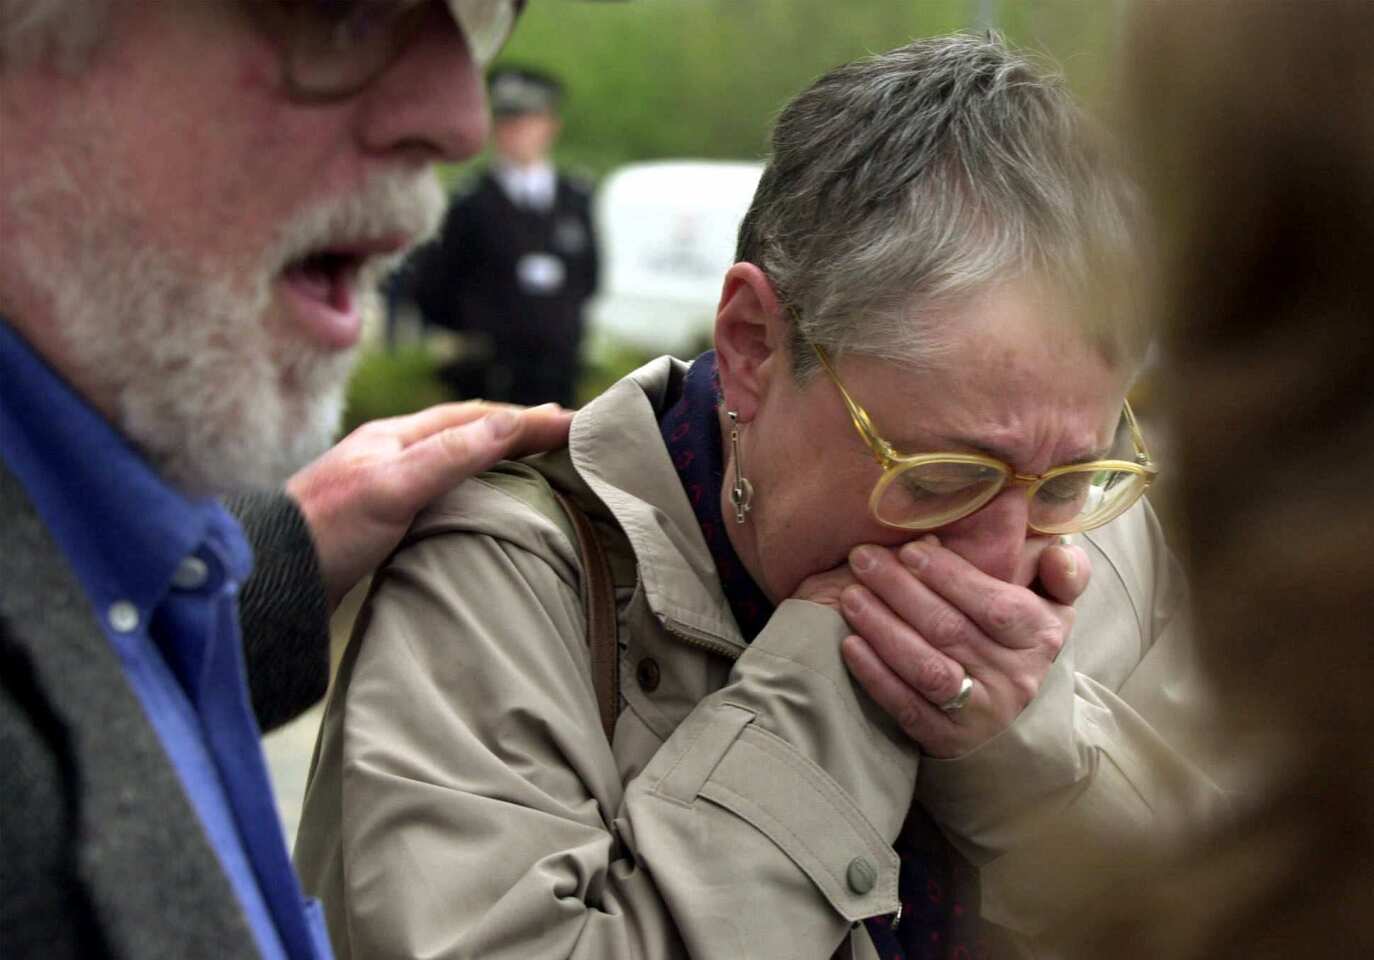 Susan Cohen of Cape May Court House, N.J., is comforted by her husband, Dan, as she breaks down after leaving the Scottish Court at the end of the first day of the trial against two Libyans at Camp Zeist, Netherlands, in 2000.